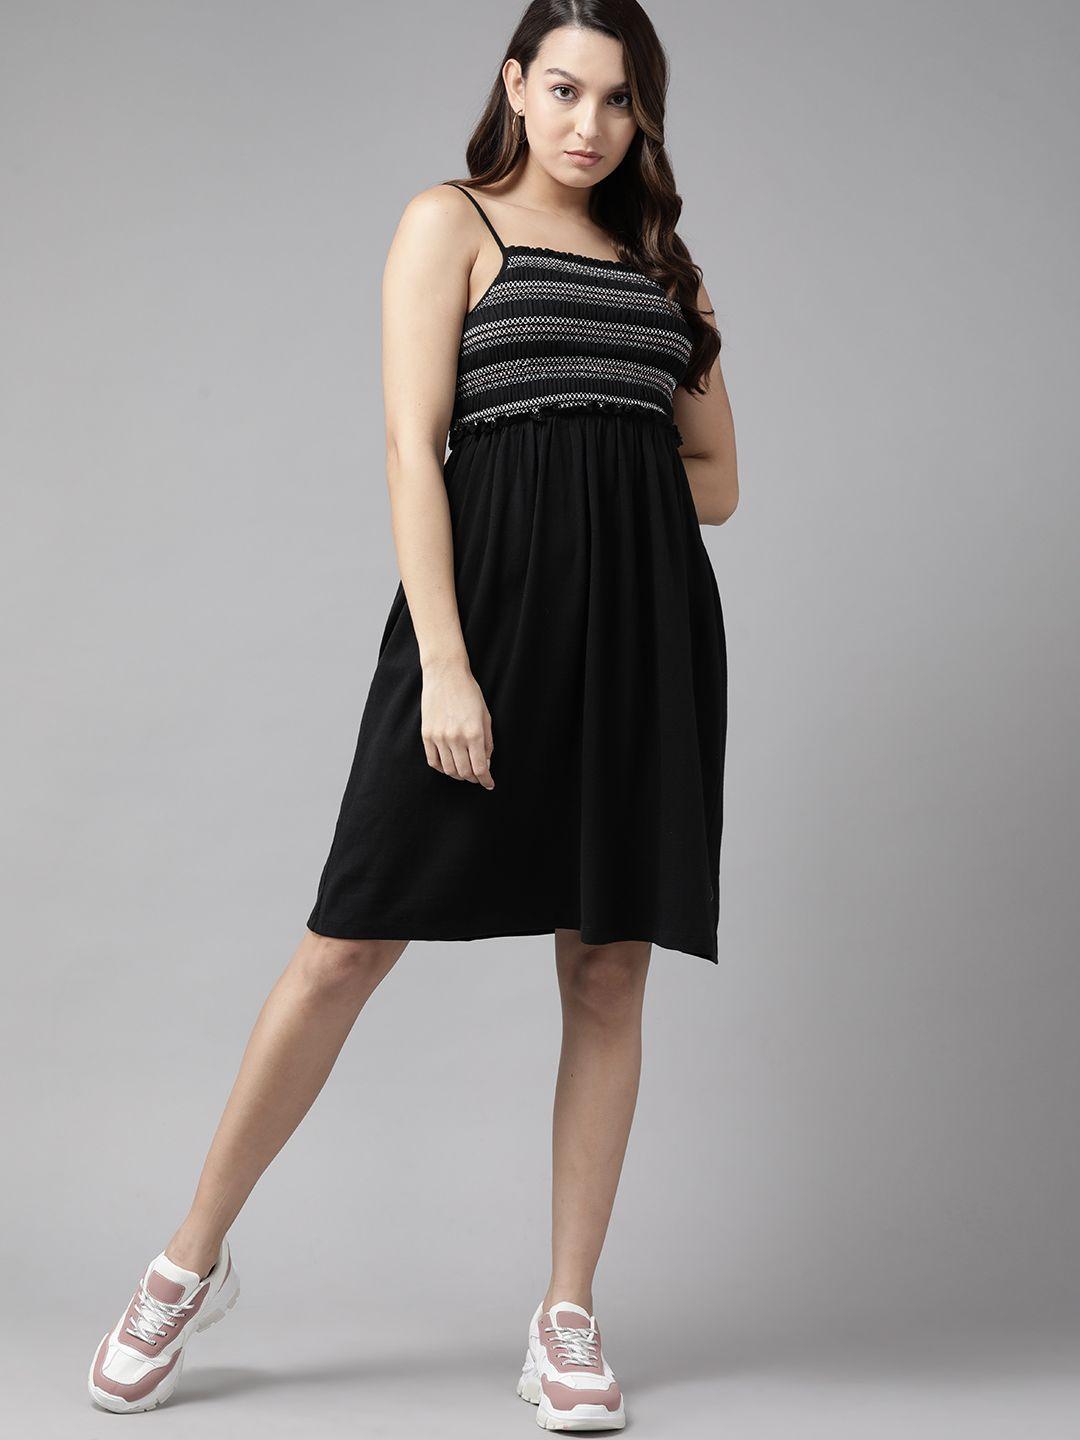 the roadster lifestyle co. smocked a-line dress